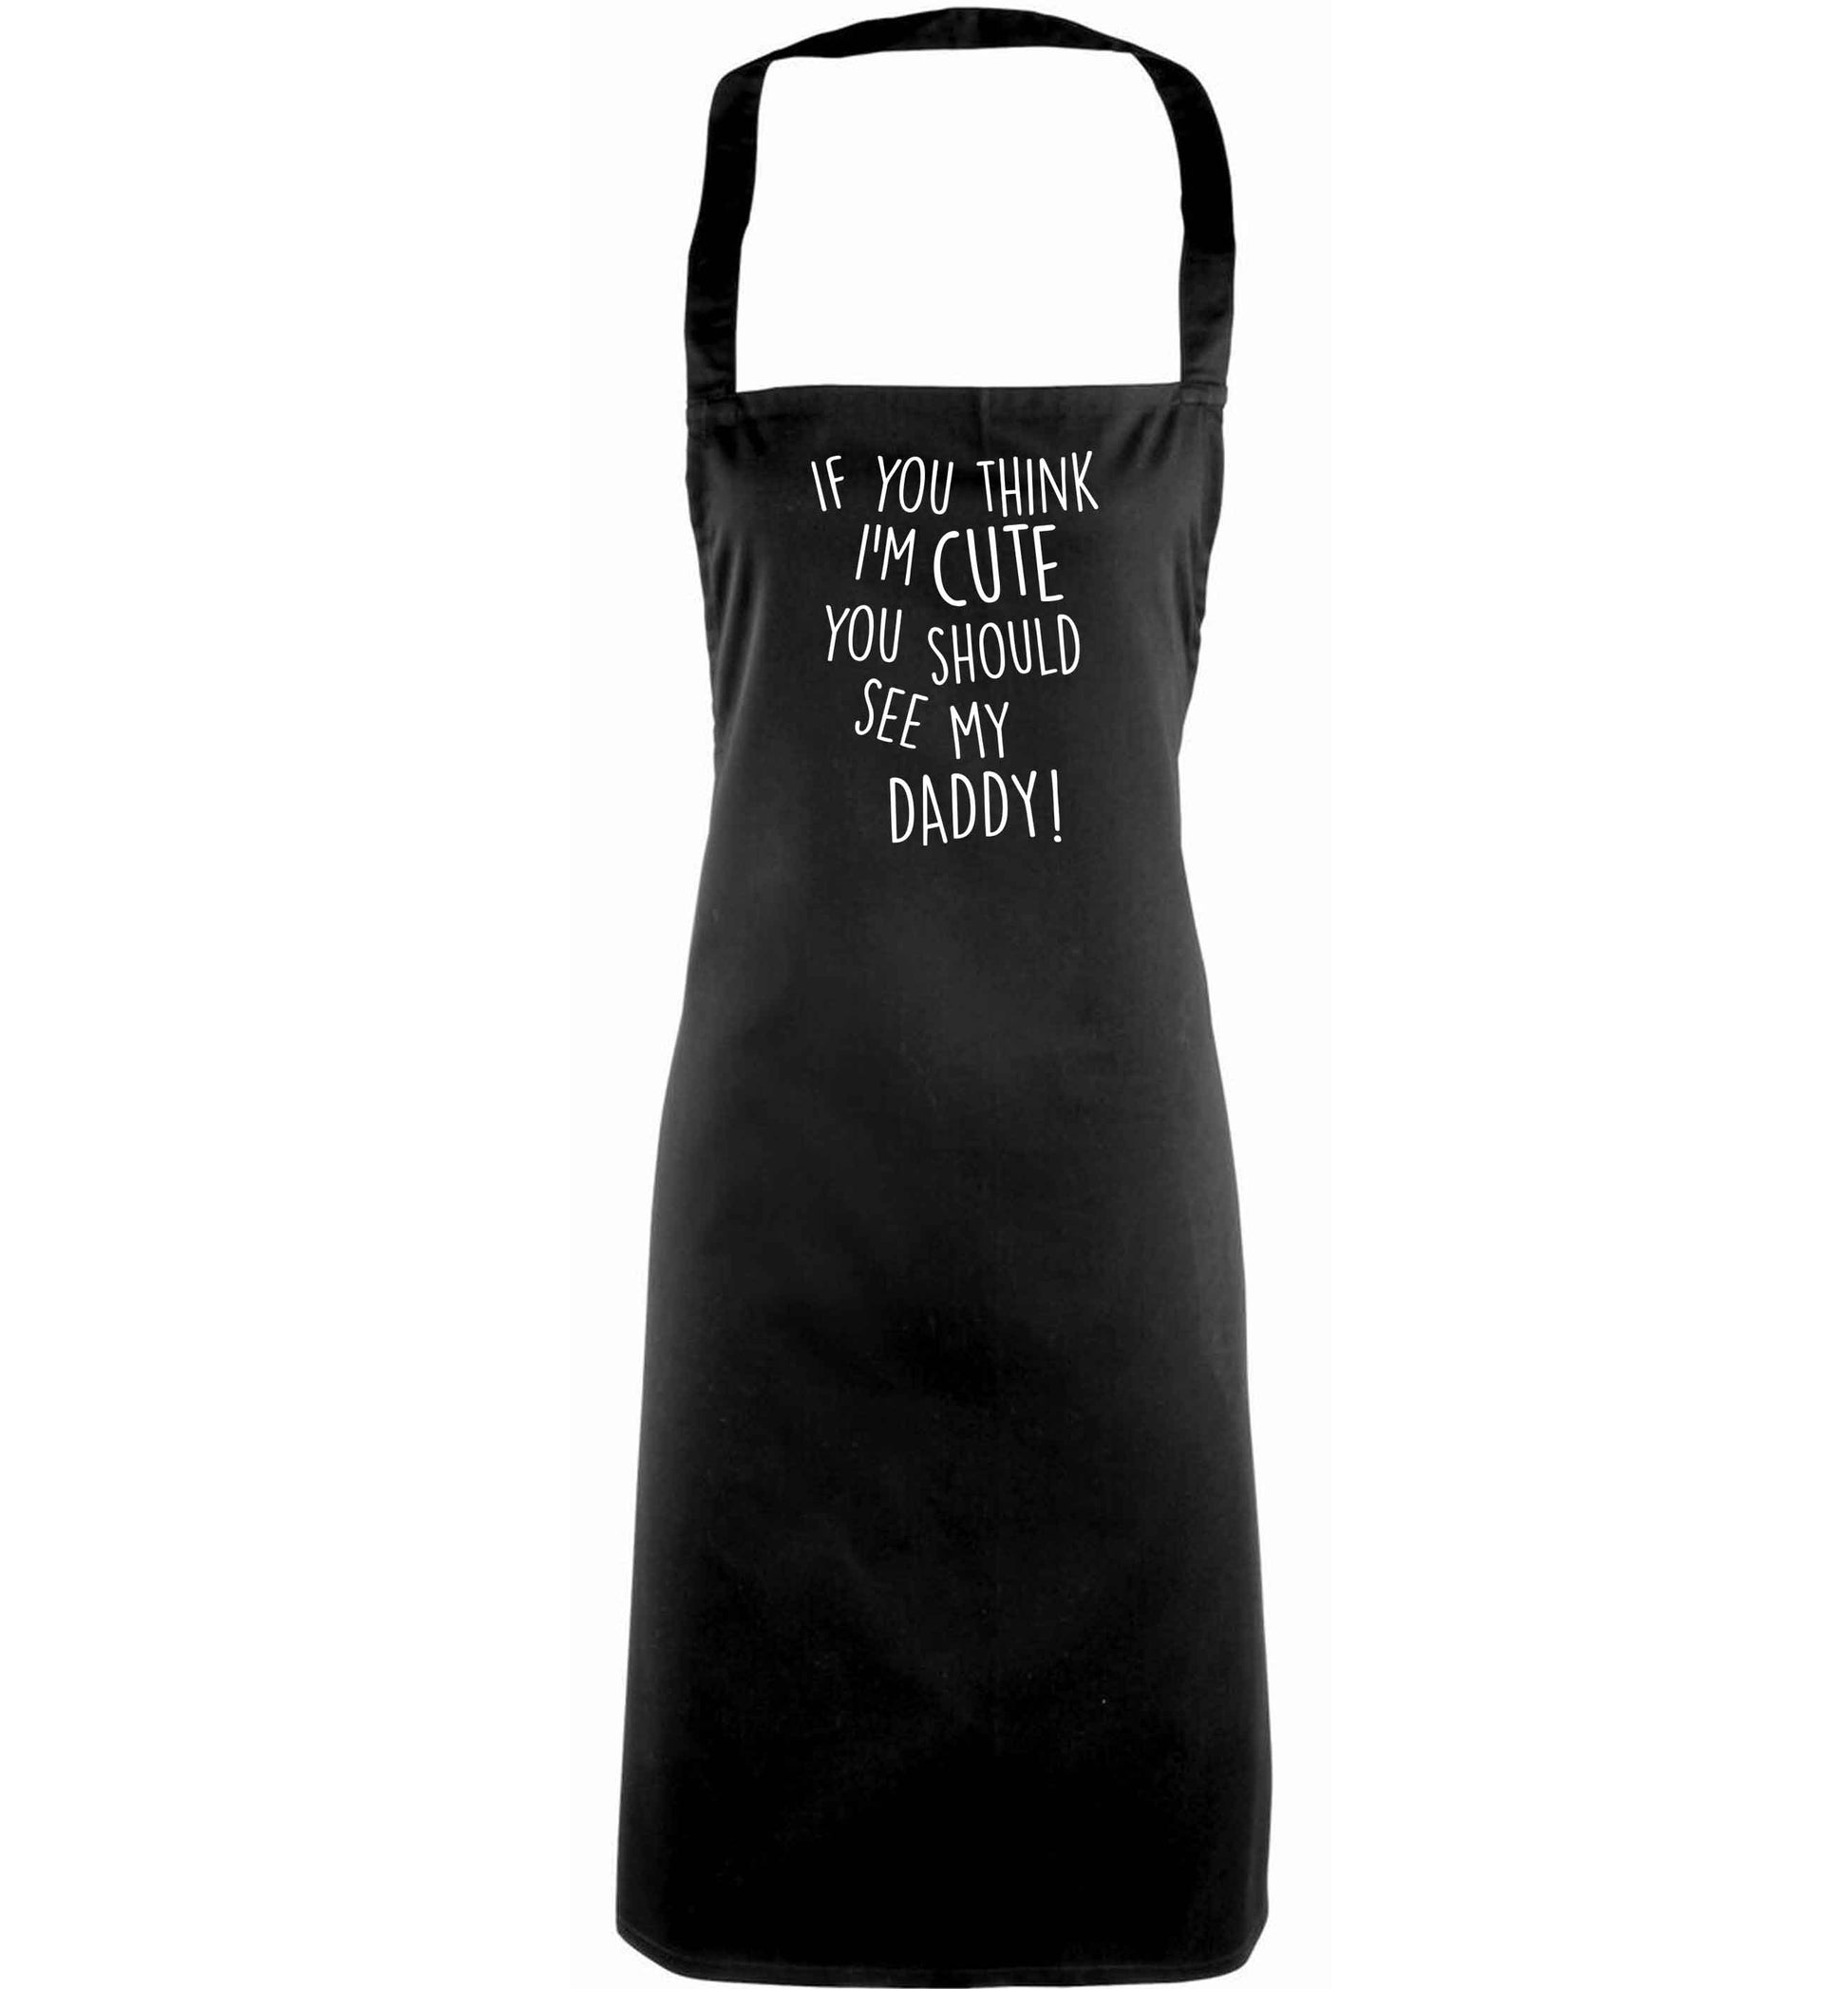 If you think I'm cute you should see my daddy adults black apron